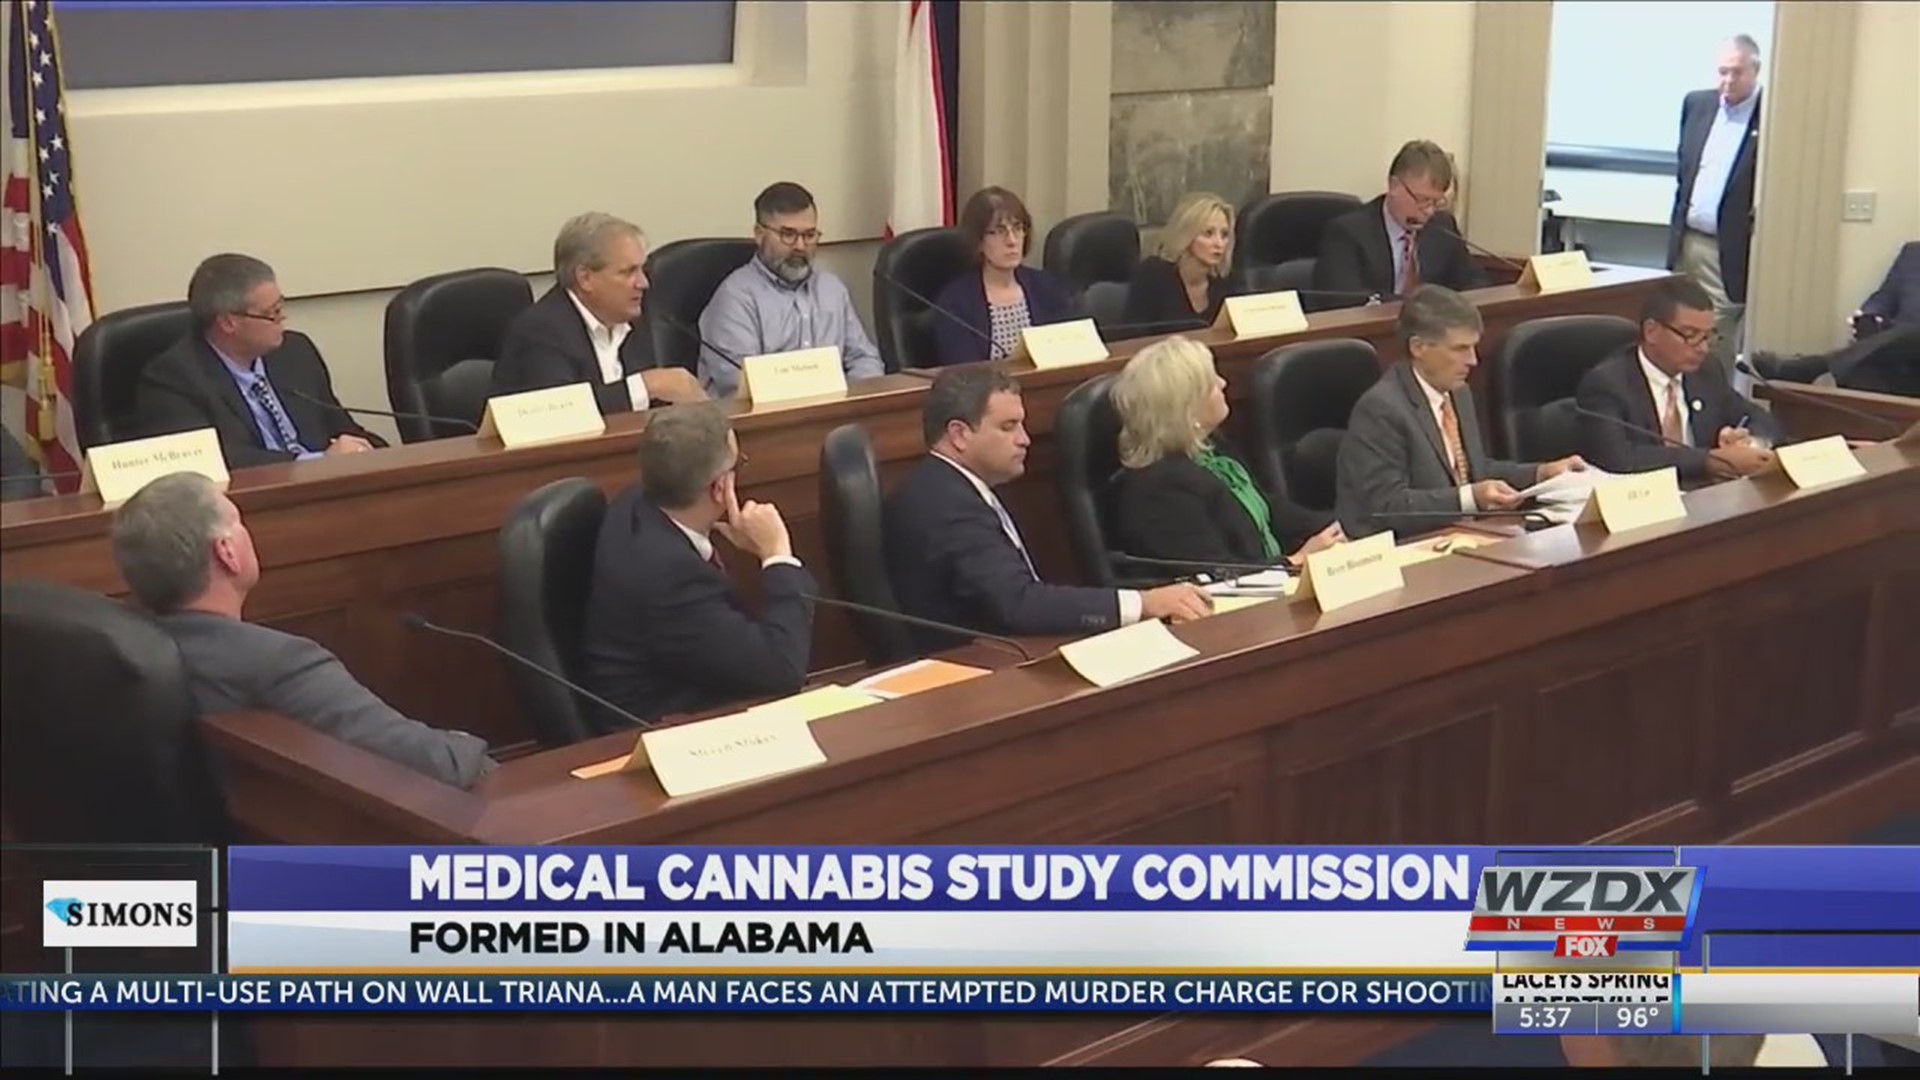 Alabama is now one of the states with a newly formed a "Medical Cannabis Study Commission".